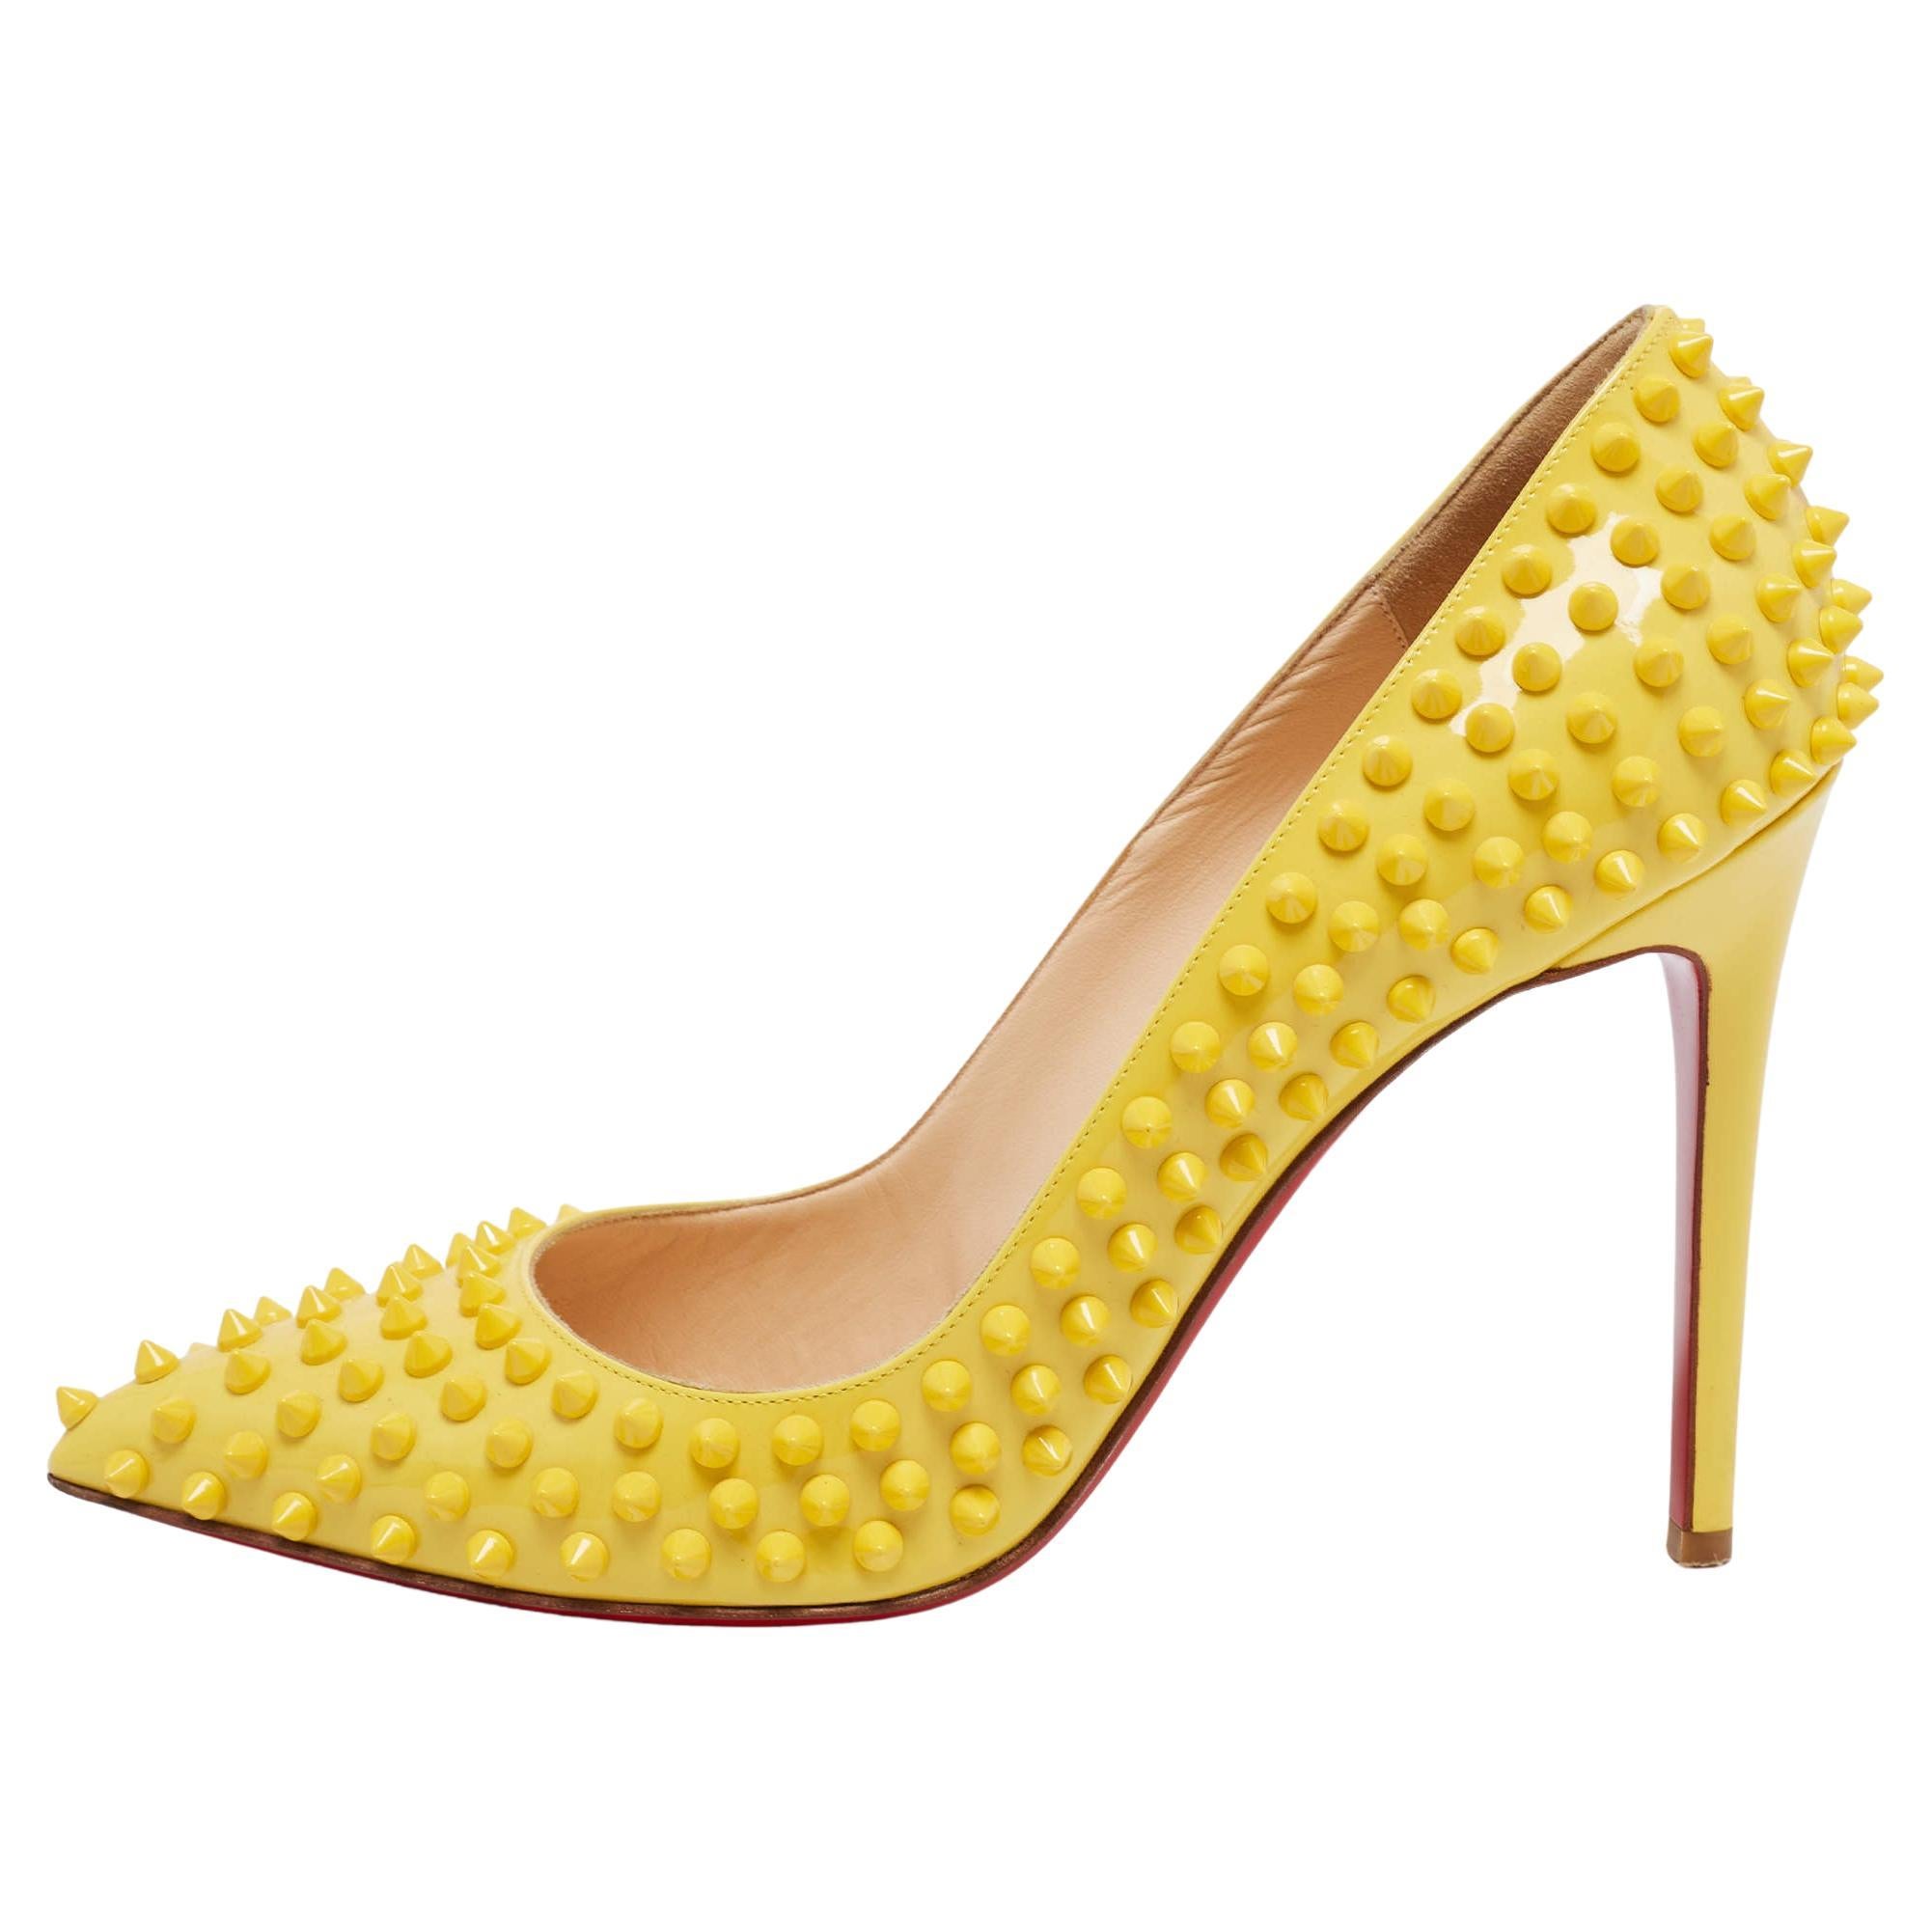 Christian Louboutin Yellow Patent Leather Pigalle Spikes Pumps Size 41